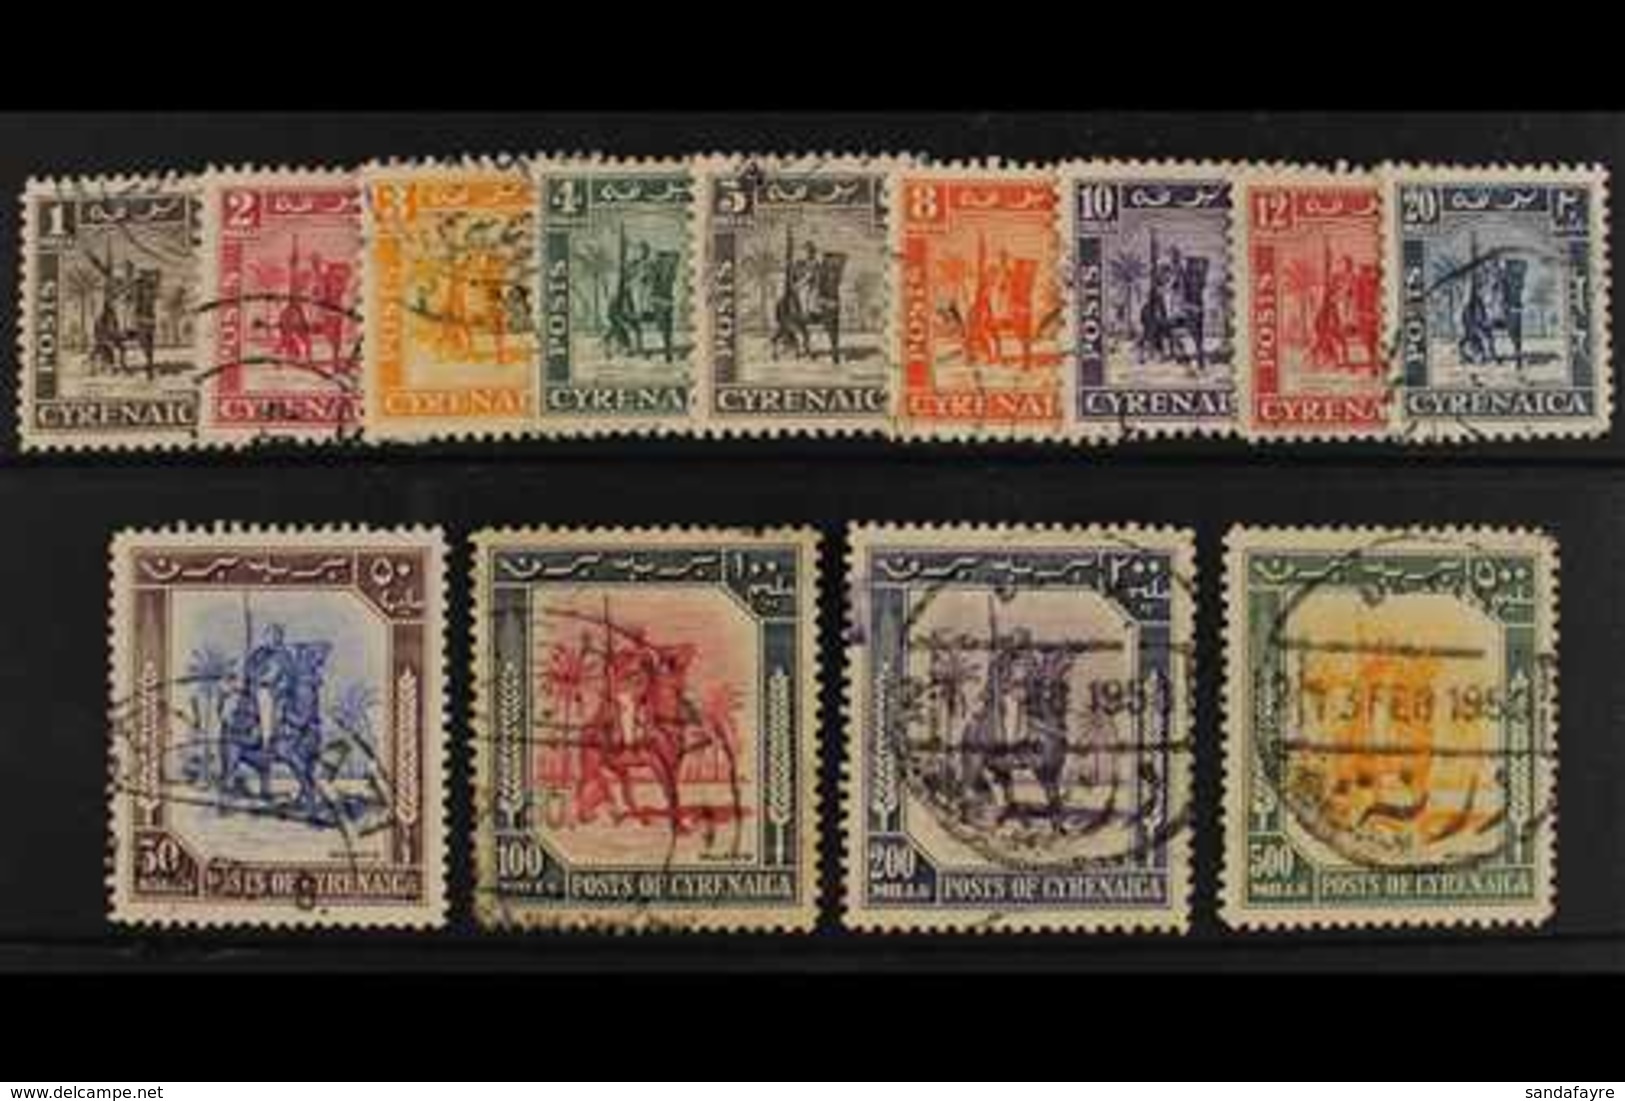 CYRENAICA 1950 "Horseman" Set, SG 136/48, Used, Many With Scarce Commercial Cancels. (13 Stamps) For More Images, Please - Afrique Orientale Italienne